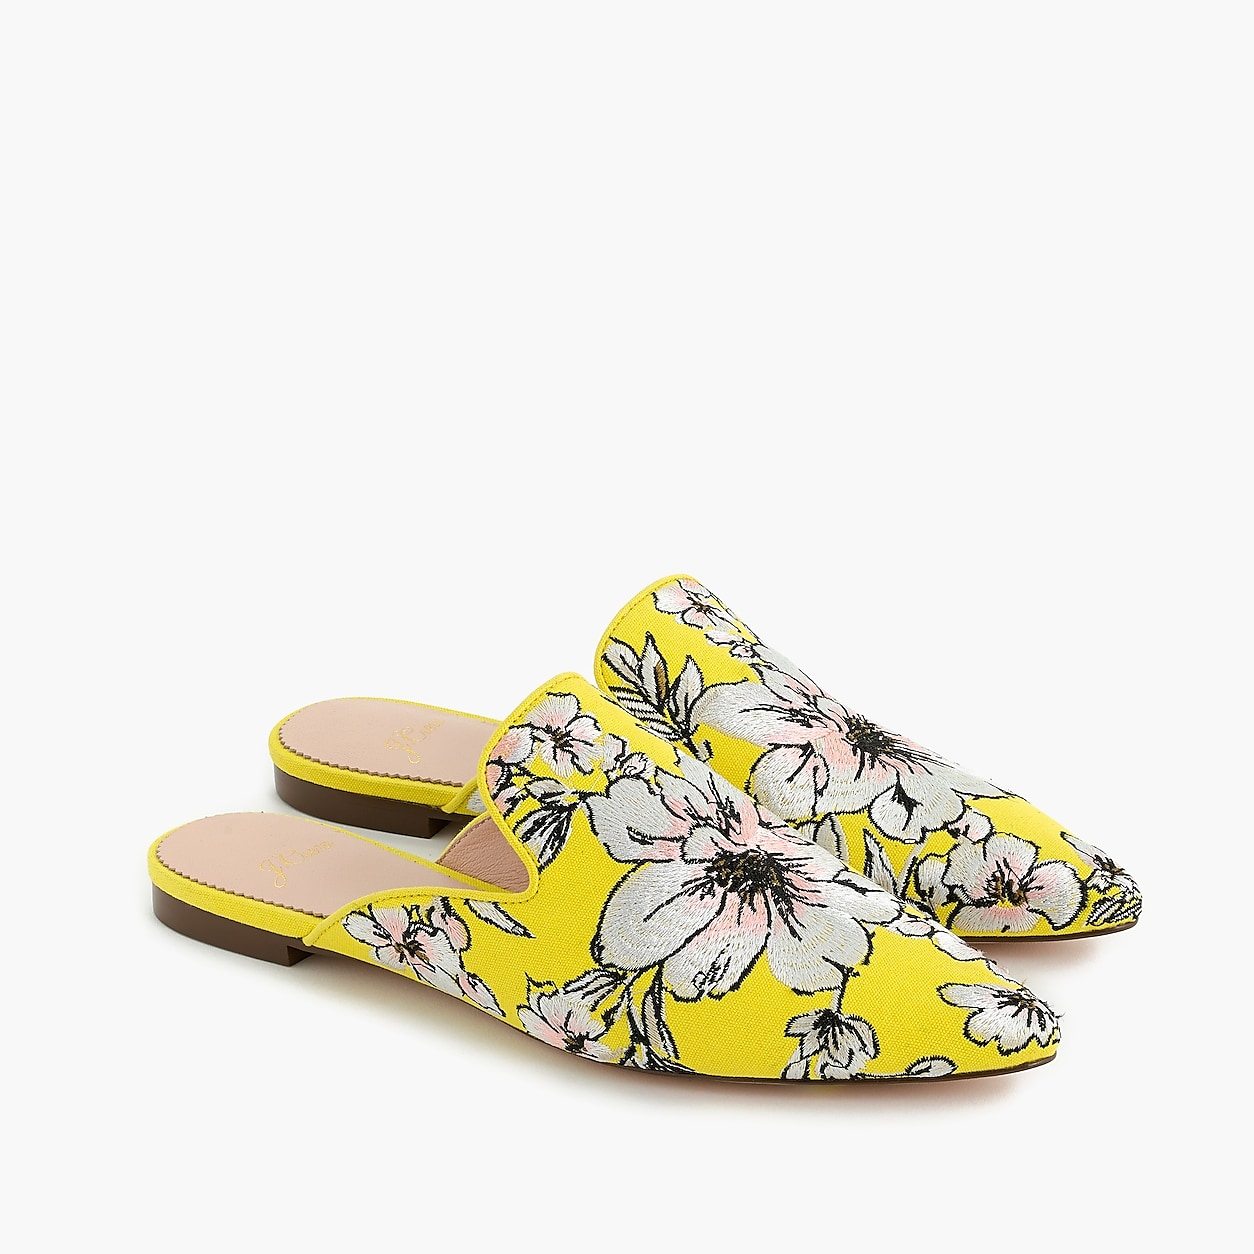 Pointed-toe slides in brocade